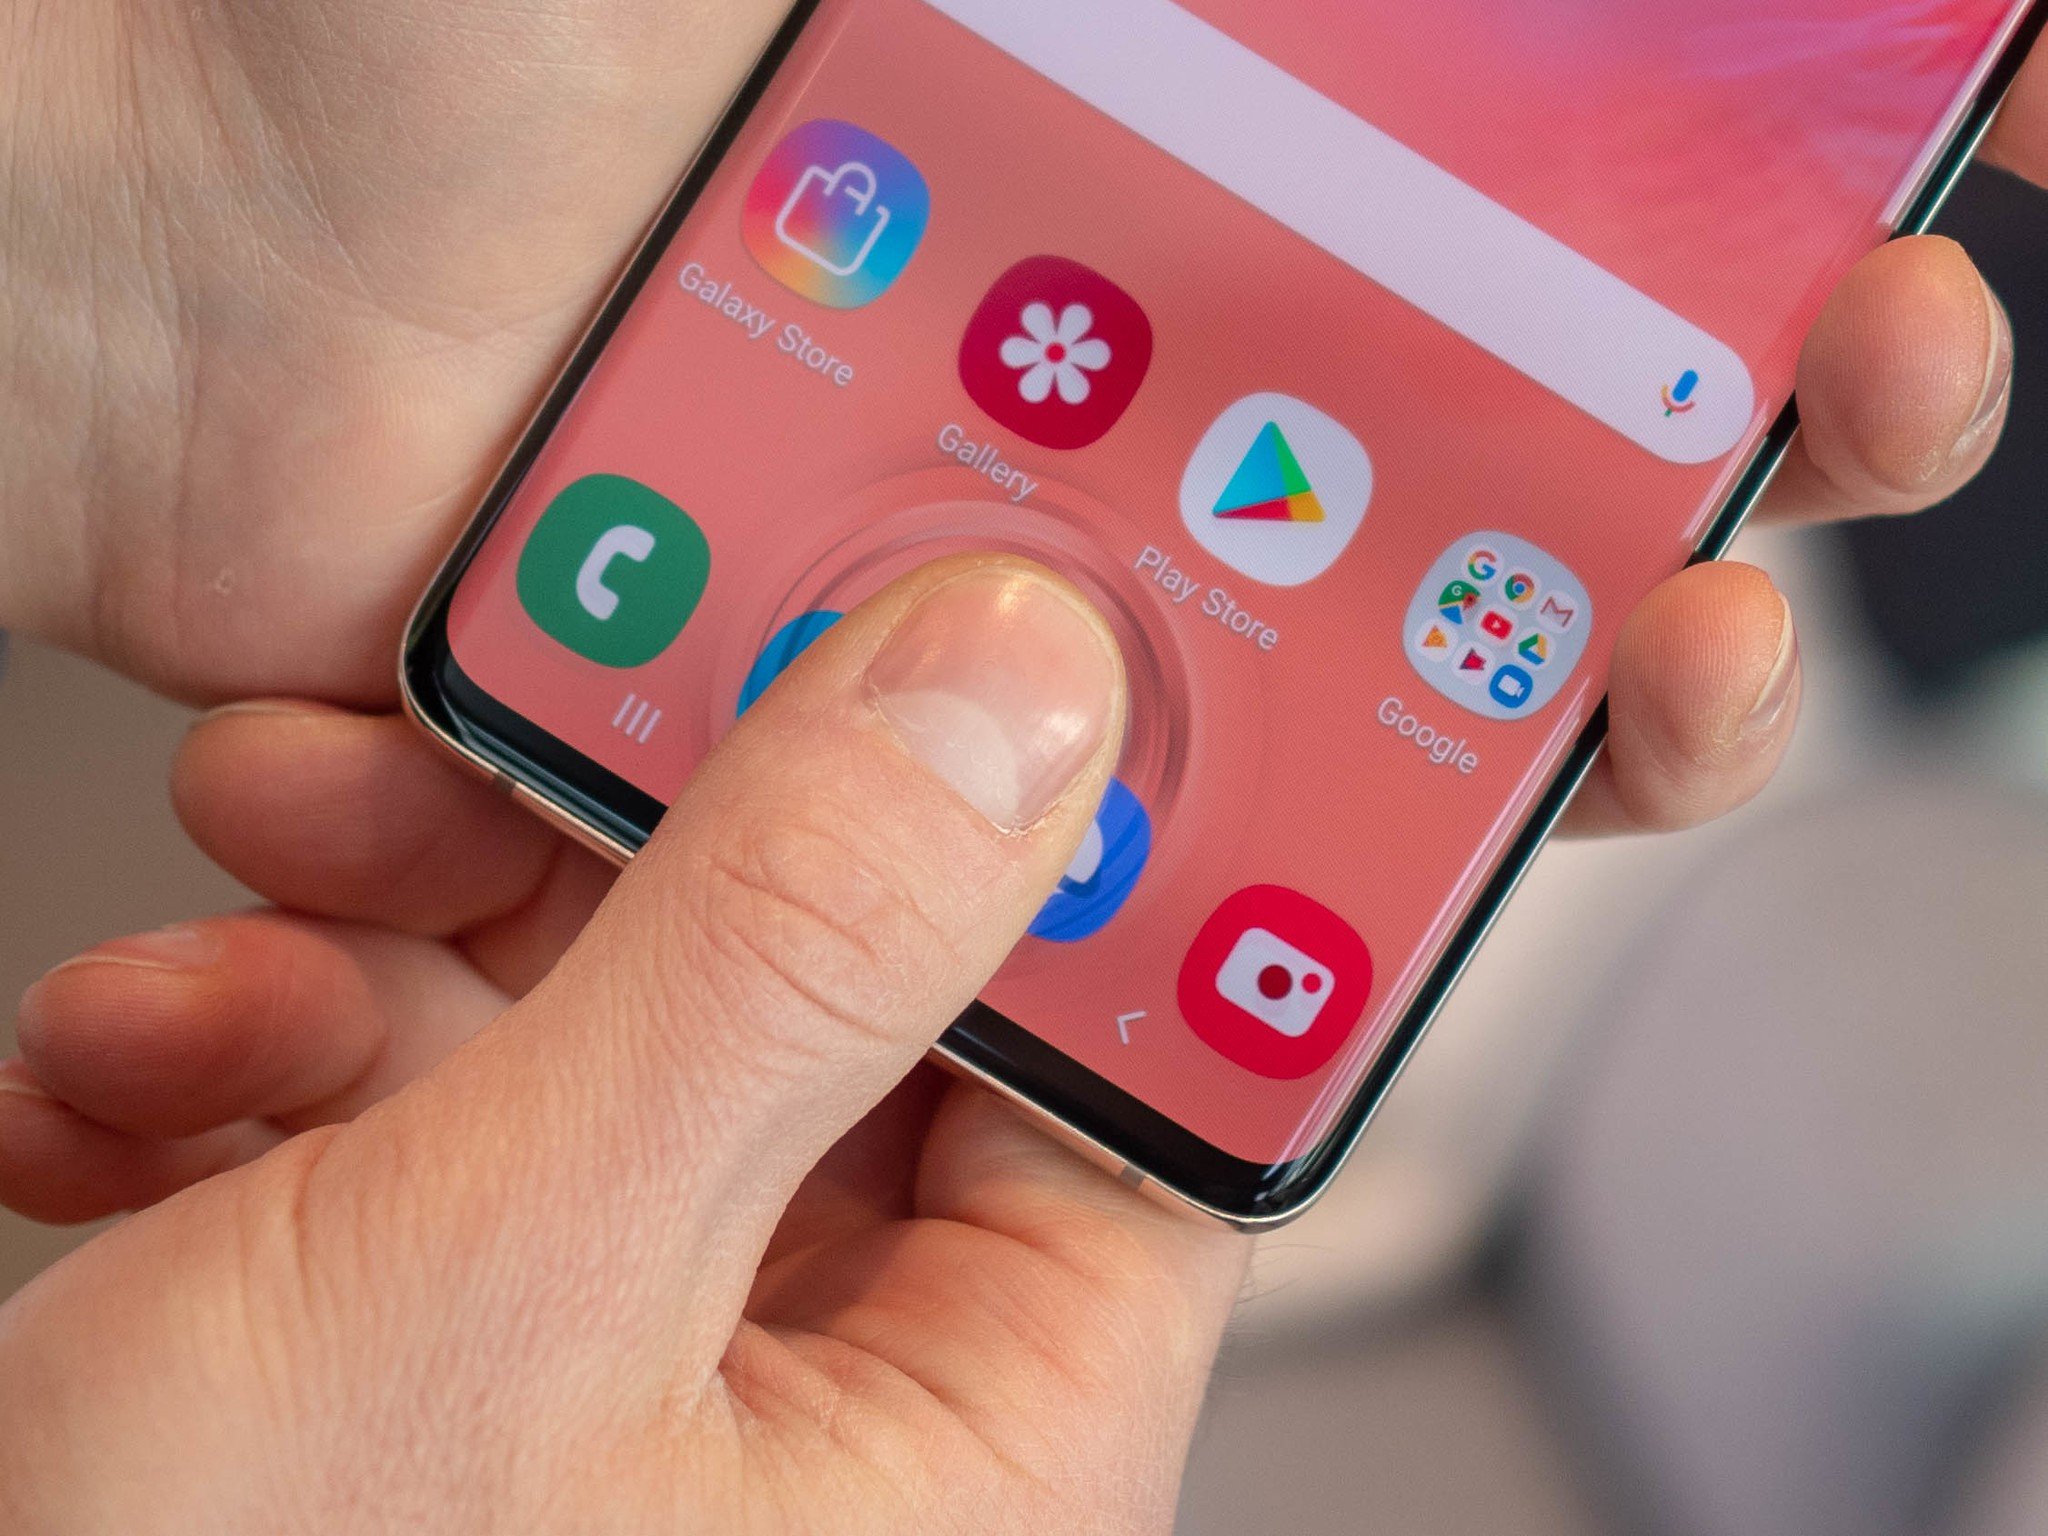 https://www.androidcentral.com/sites/androidcentral.com/files/styles/large_wm_brw/public/article_images/2019/02/samsung-galaxy-s10-fingerprint-1.jpg?itok=29WU4i65